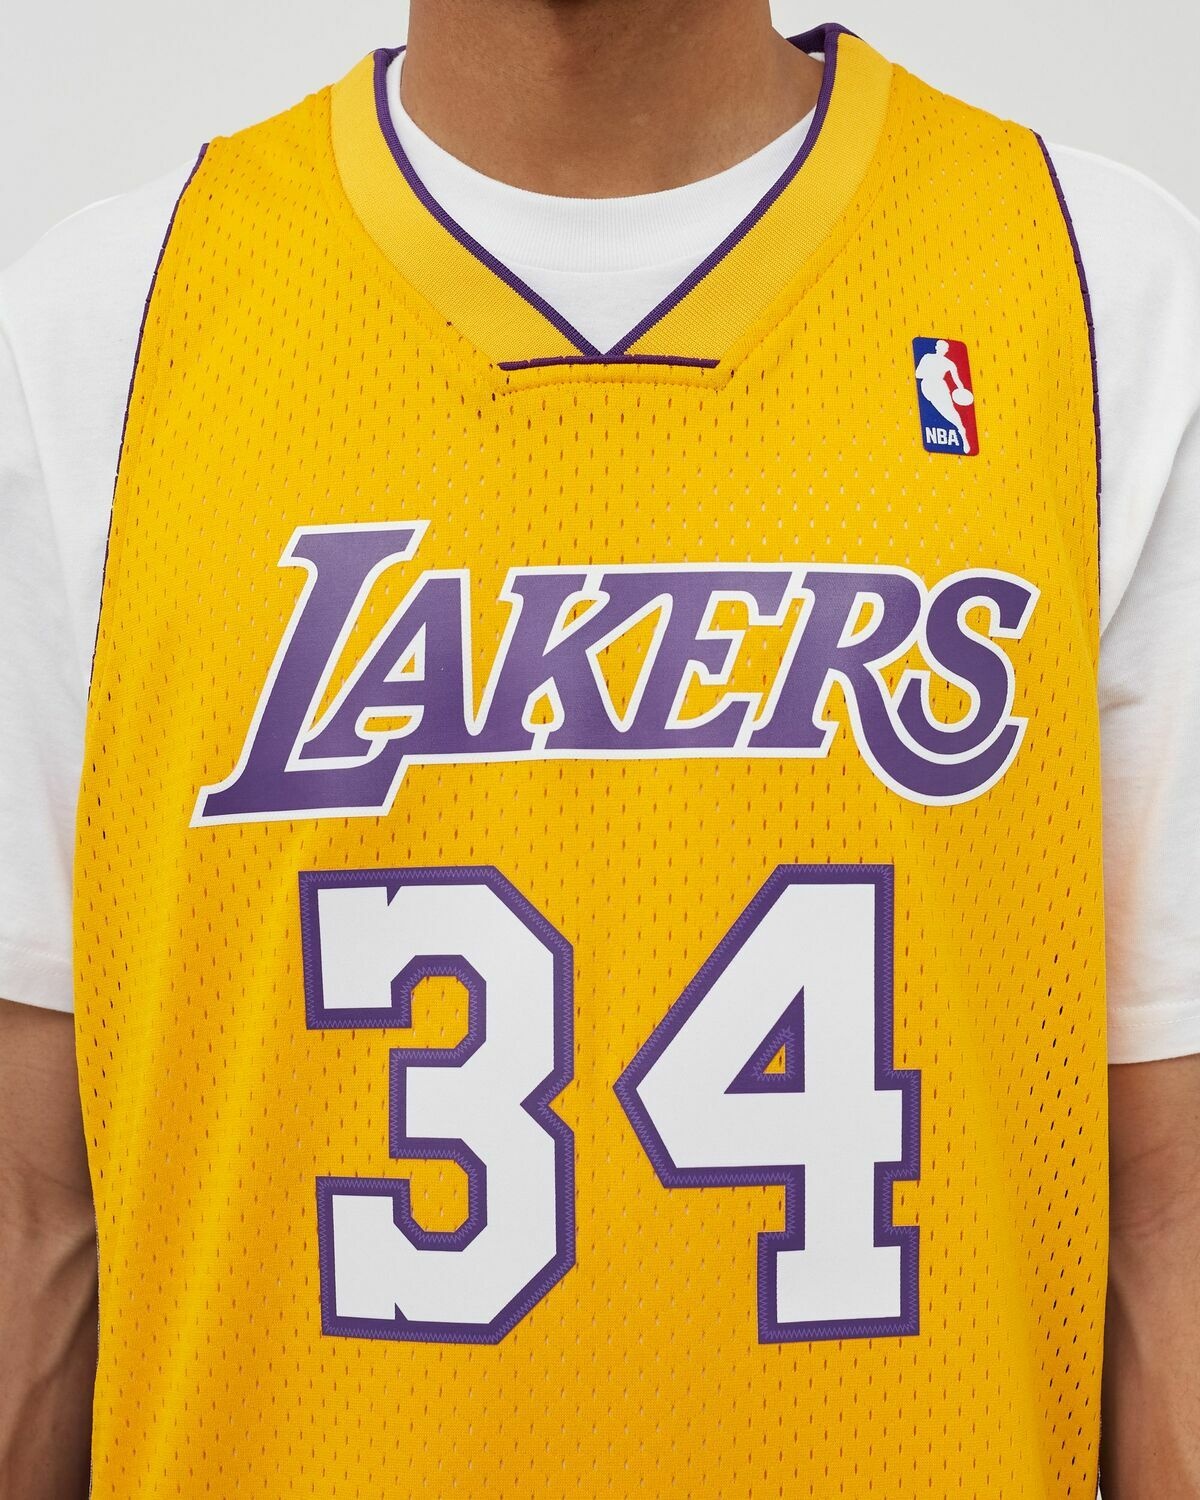 Mitchell & Ness Nba Swingman Jersey Los Angeles Lakers Home 1999 00 Shaquille O'neal #34 Yellow - Mens - Jerseys